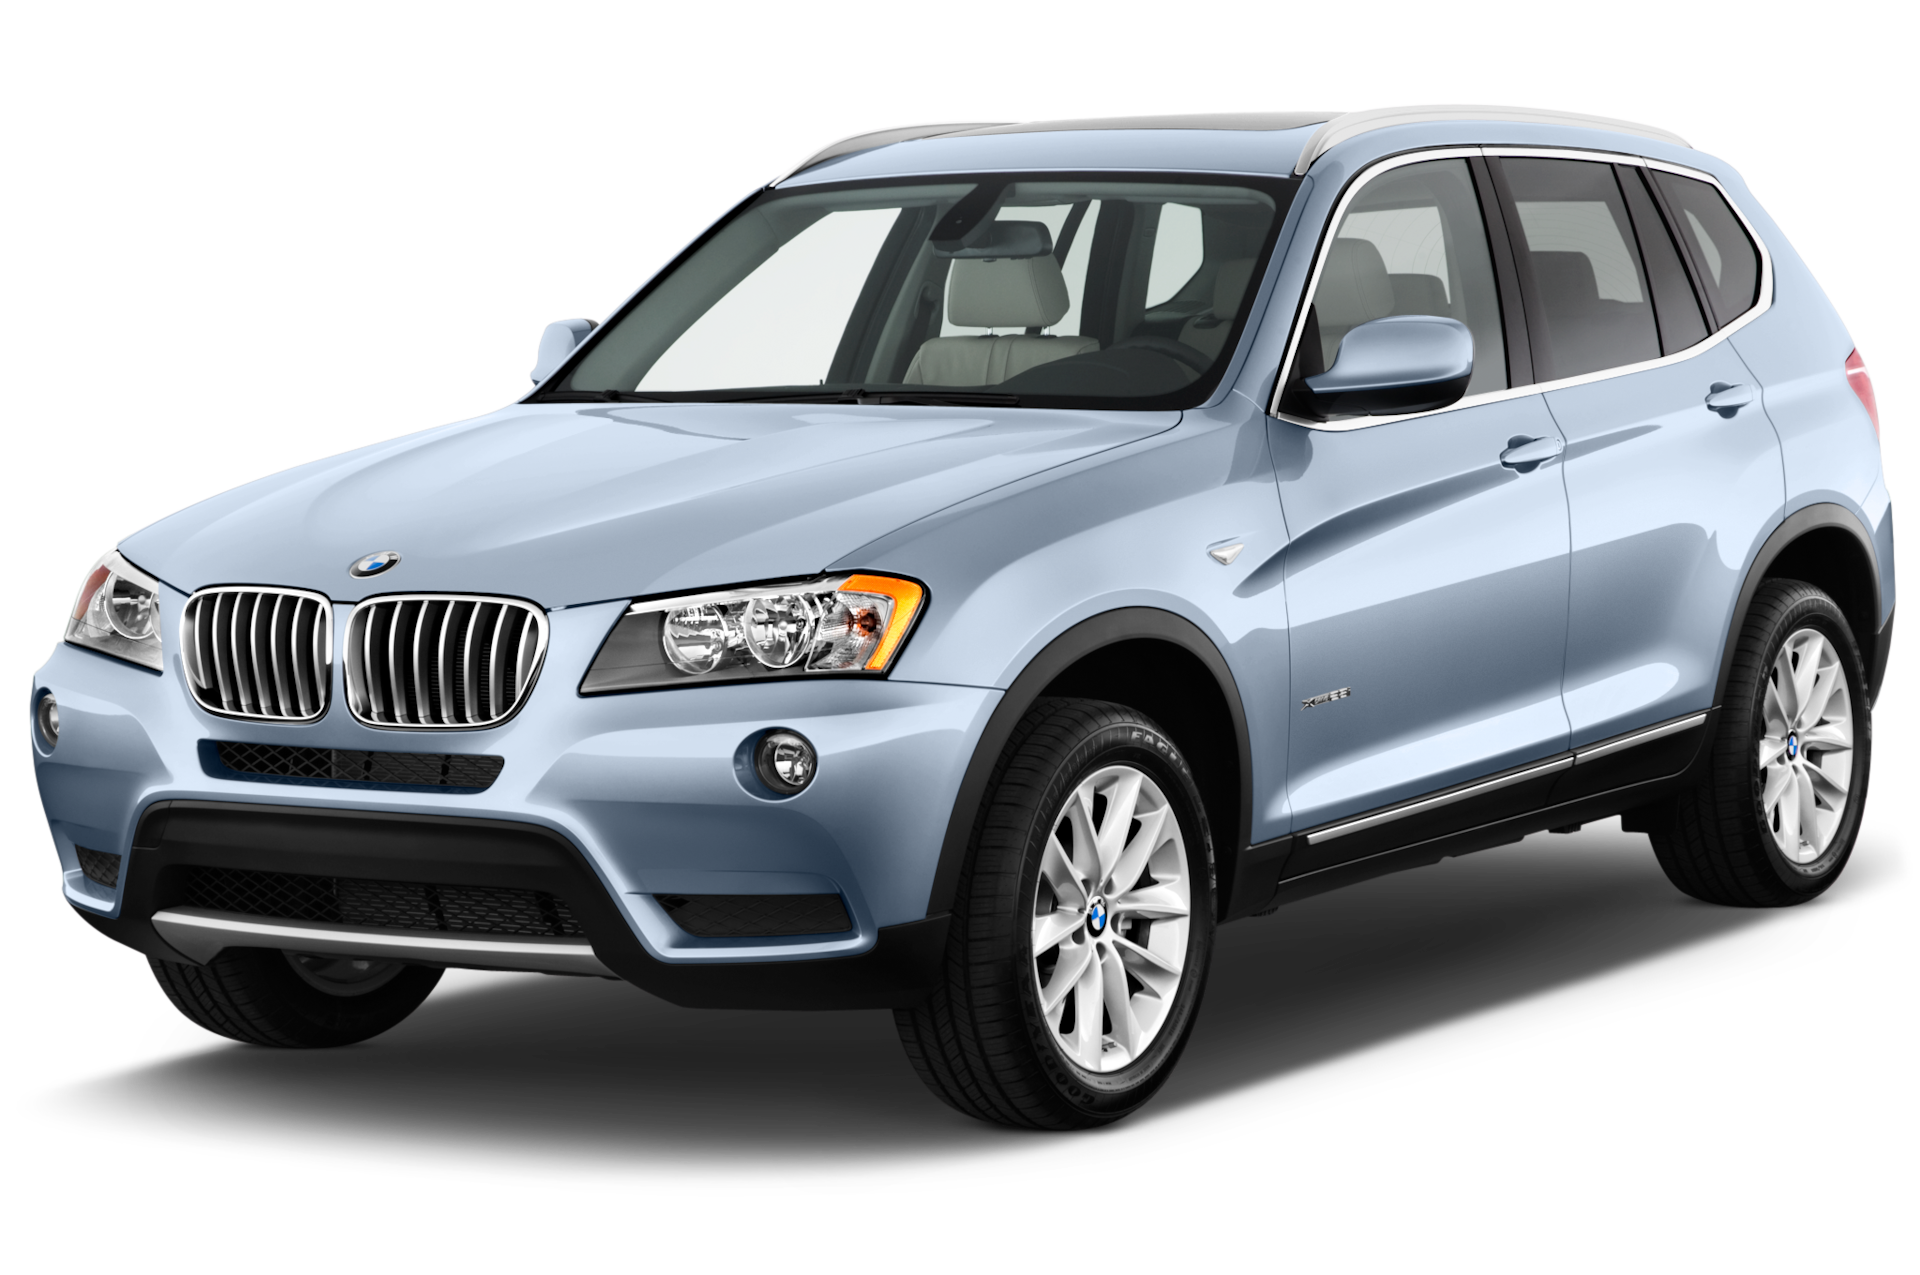 2014 BMW X3 Prices, Reviews, and Photos - MotorTrend